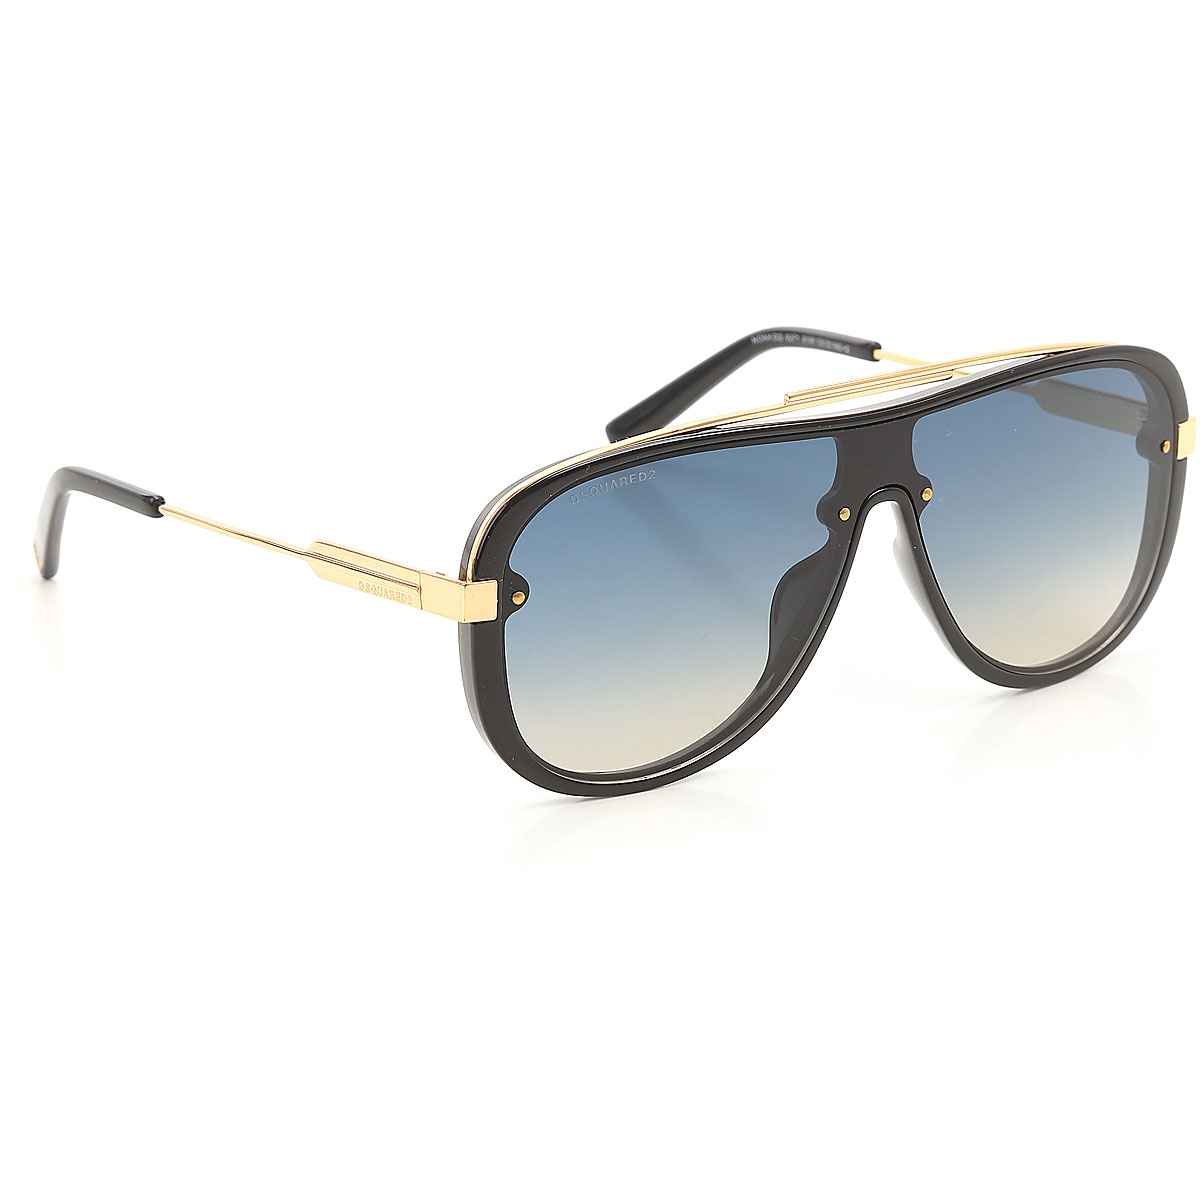 Sunglasses Dsquared2, Style code: dq0271-01w-N18